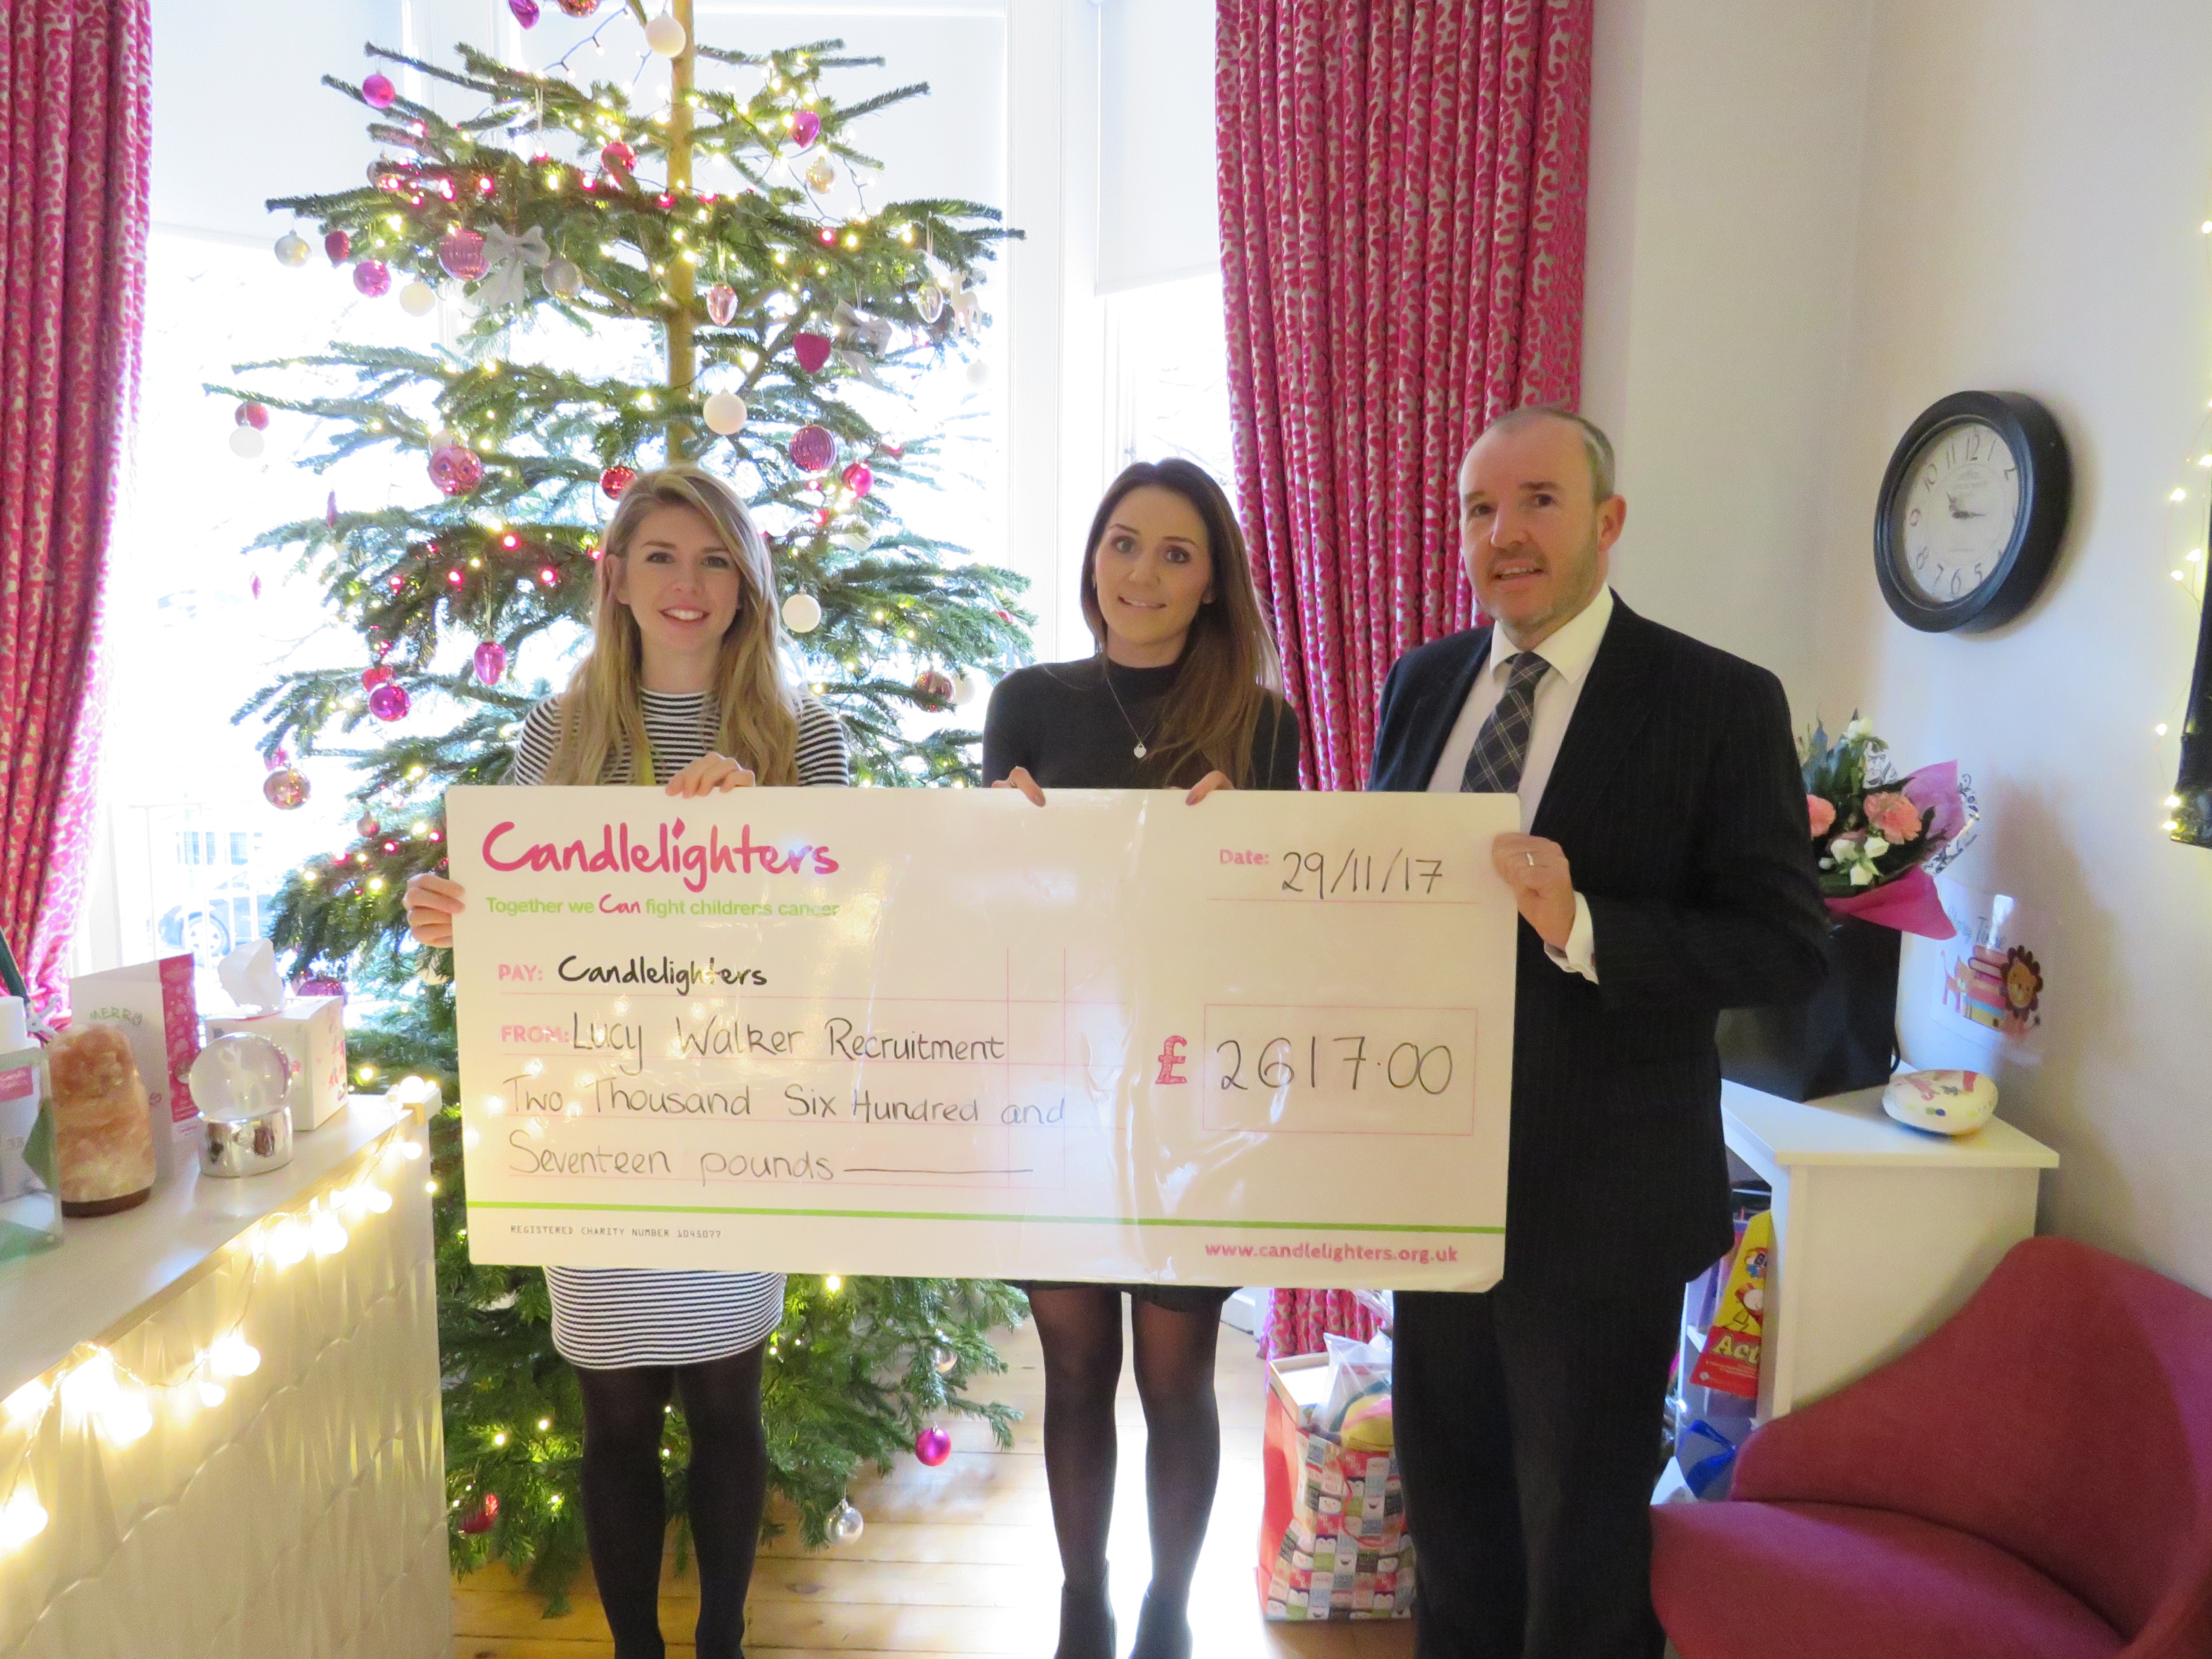 Lucy Walker Recruitment Raise £2617 for Candlelighters Charity as They Mark 25 Years in Business.